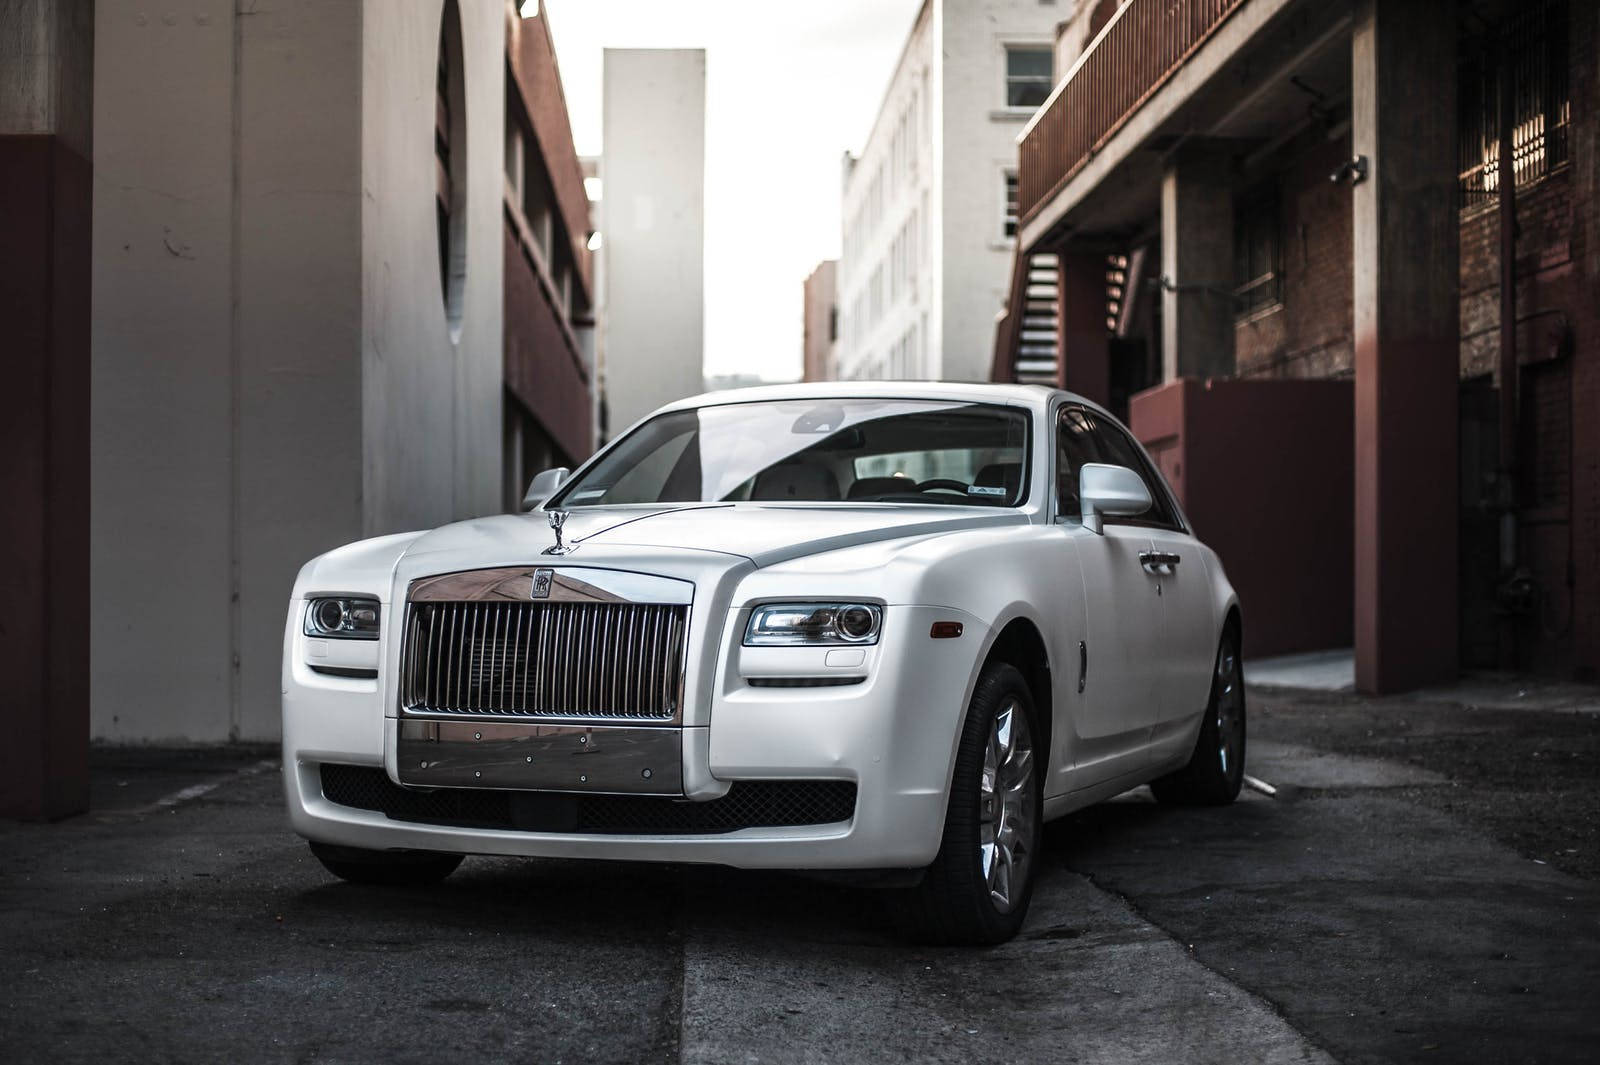 A Vision Of Prestige - White Ghost Luxury Car In An Alley